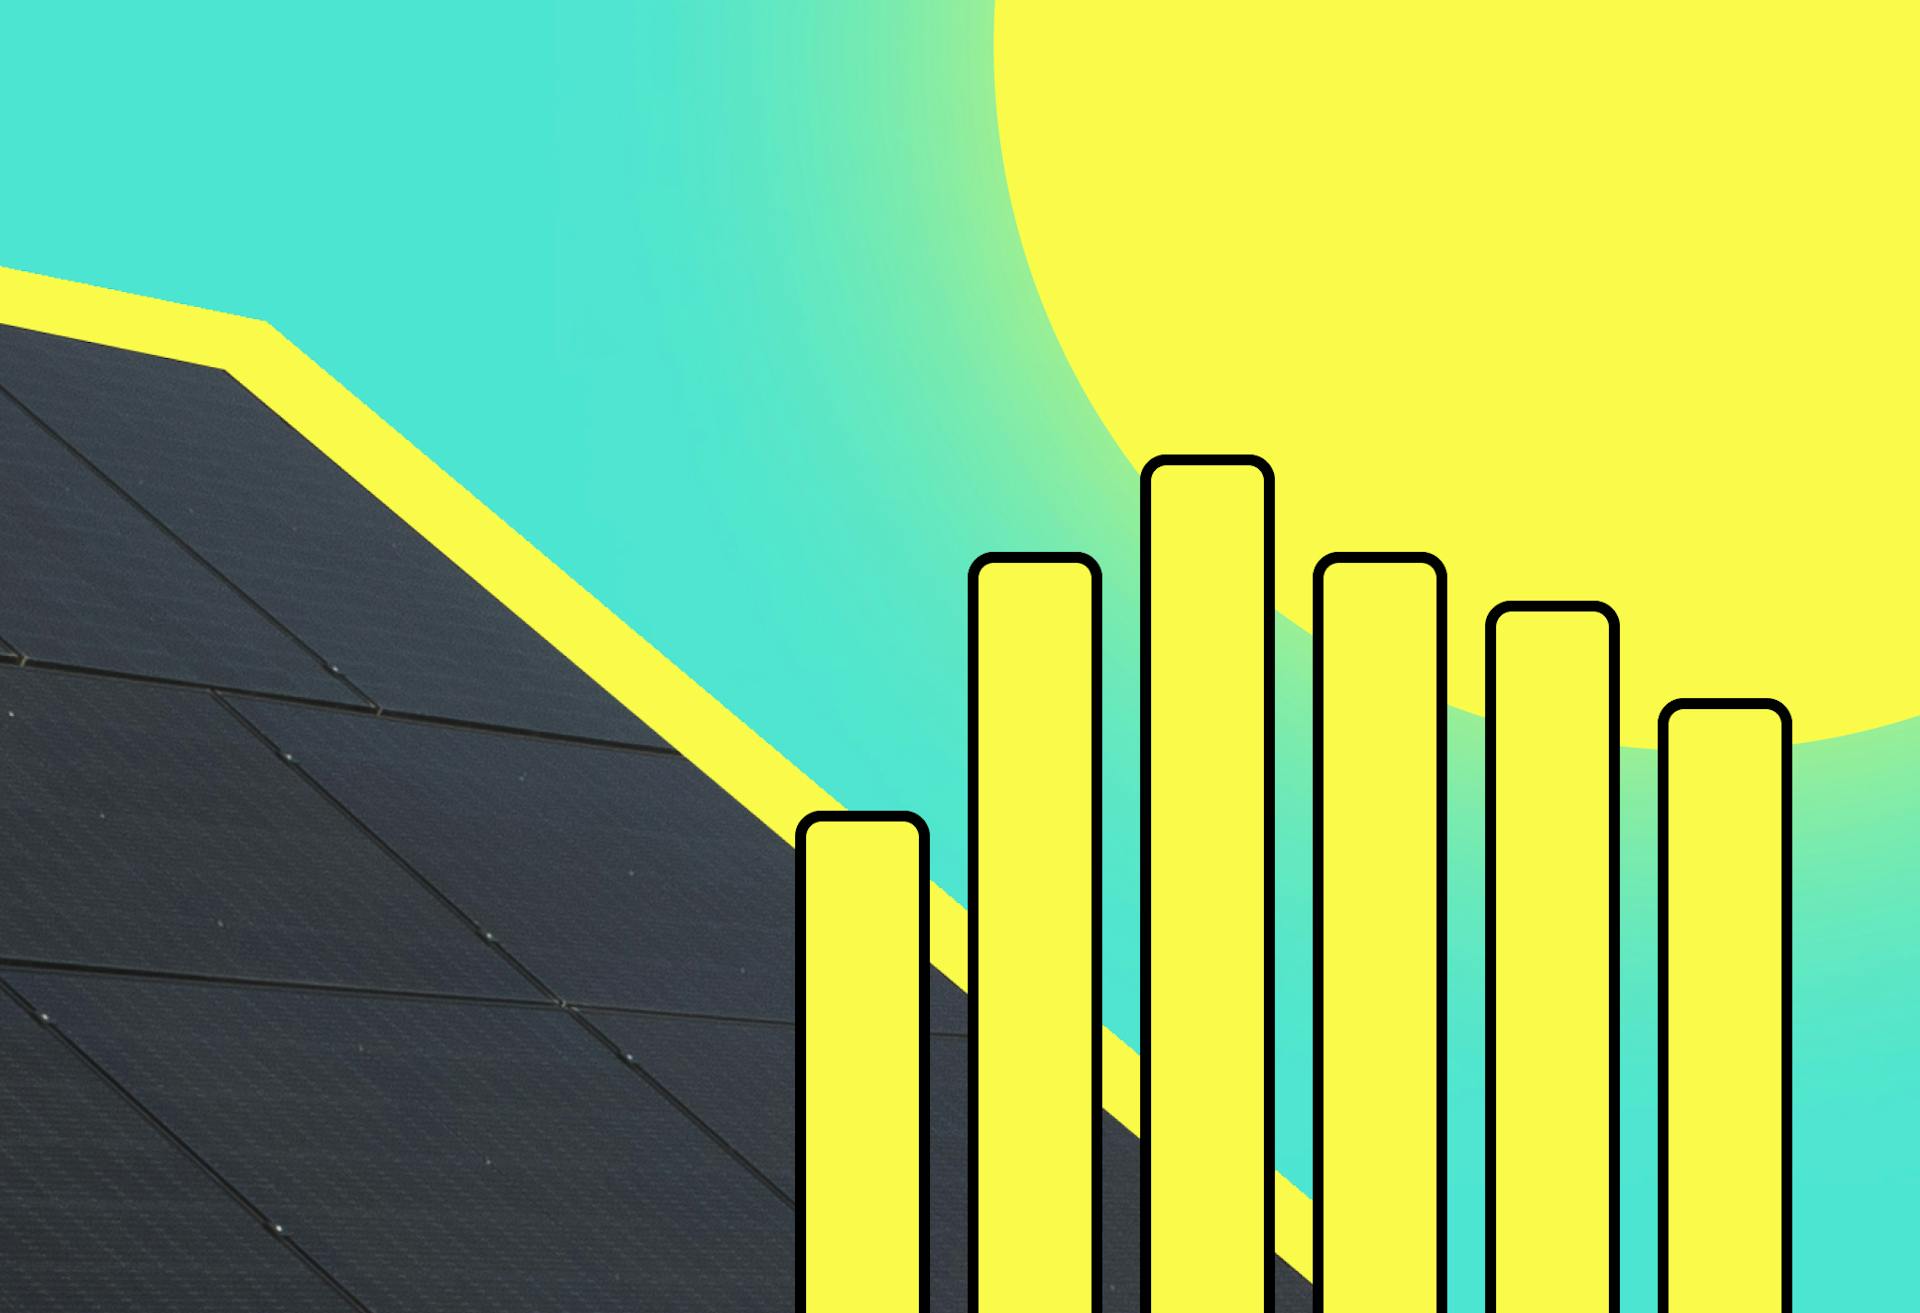 A black monocrystalline solar panel with a yellow bar chart in the foreground, a cartoon yellow sun in the background